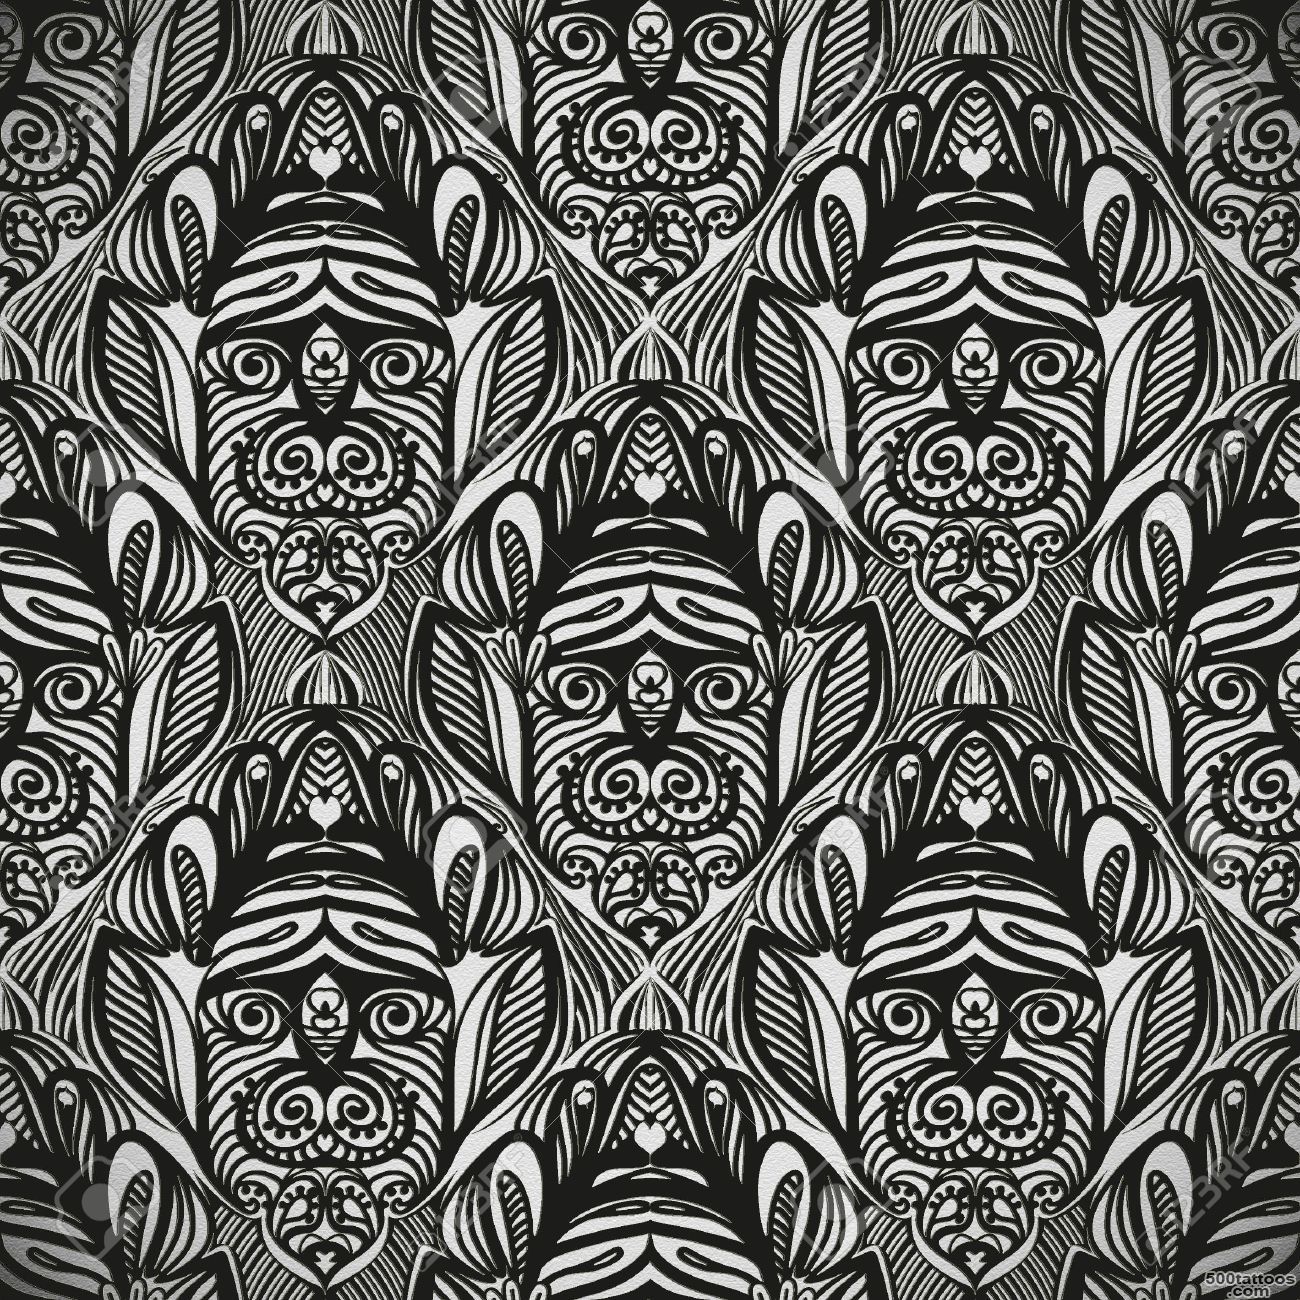 Seamless-Pattern,-Tattoo-Or-Tribal-Design-Royalty-Free-Cliparts-..._20.jpg